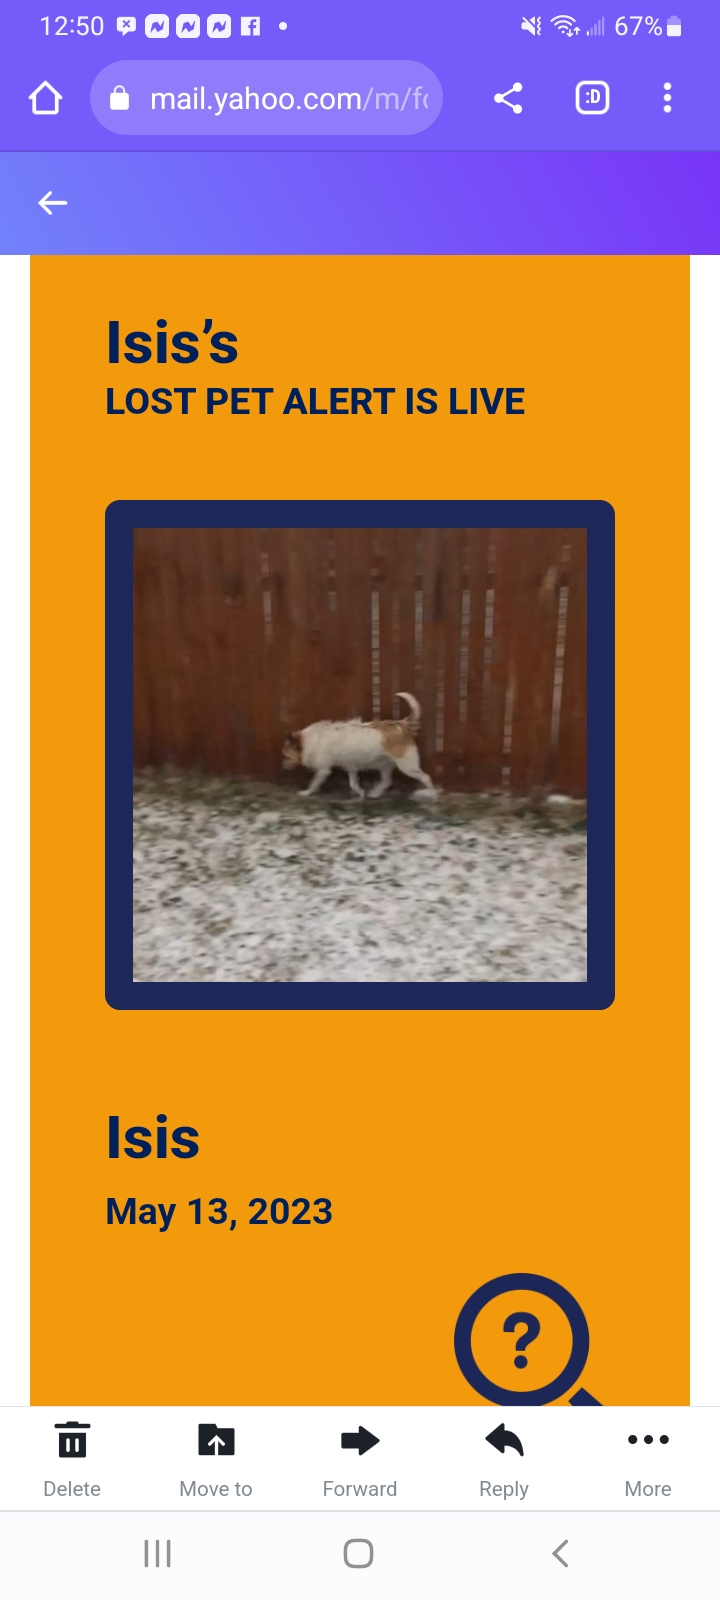 Image of Isis, Lost Dog